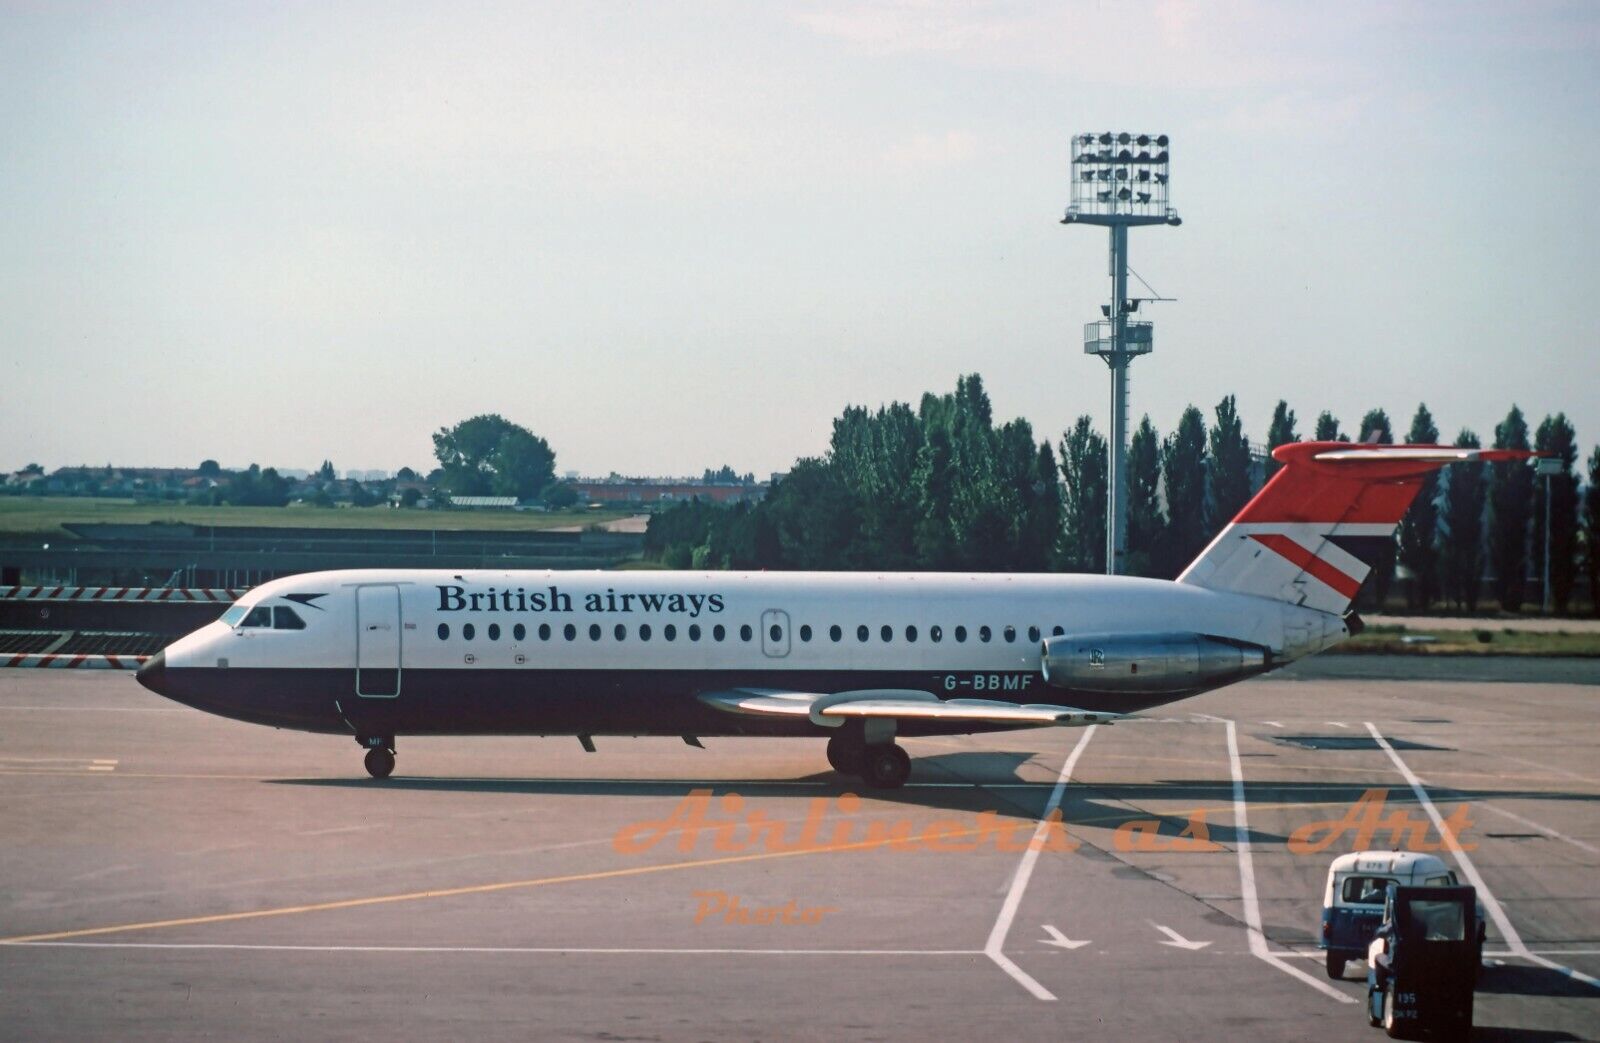 British Airways BAC 1-11 G-BBMF at ORY in August 1975 8\